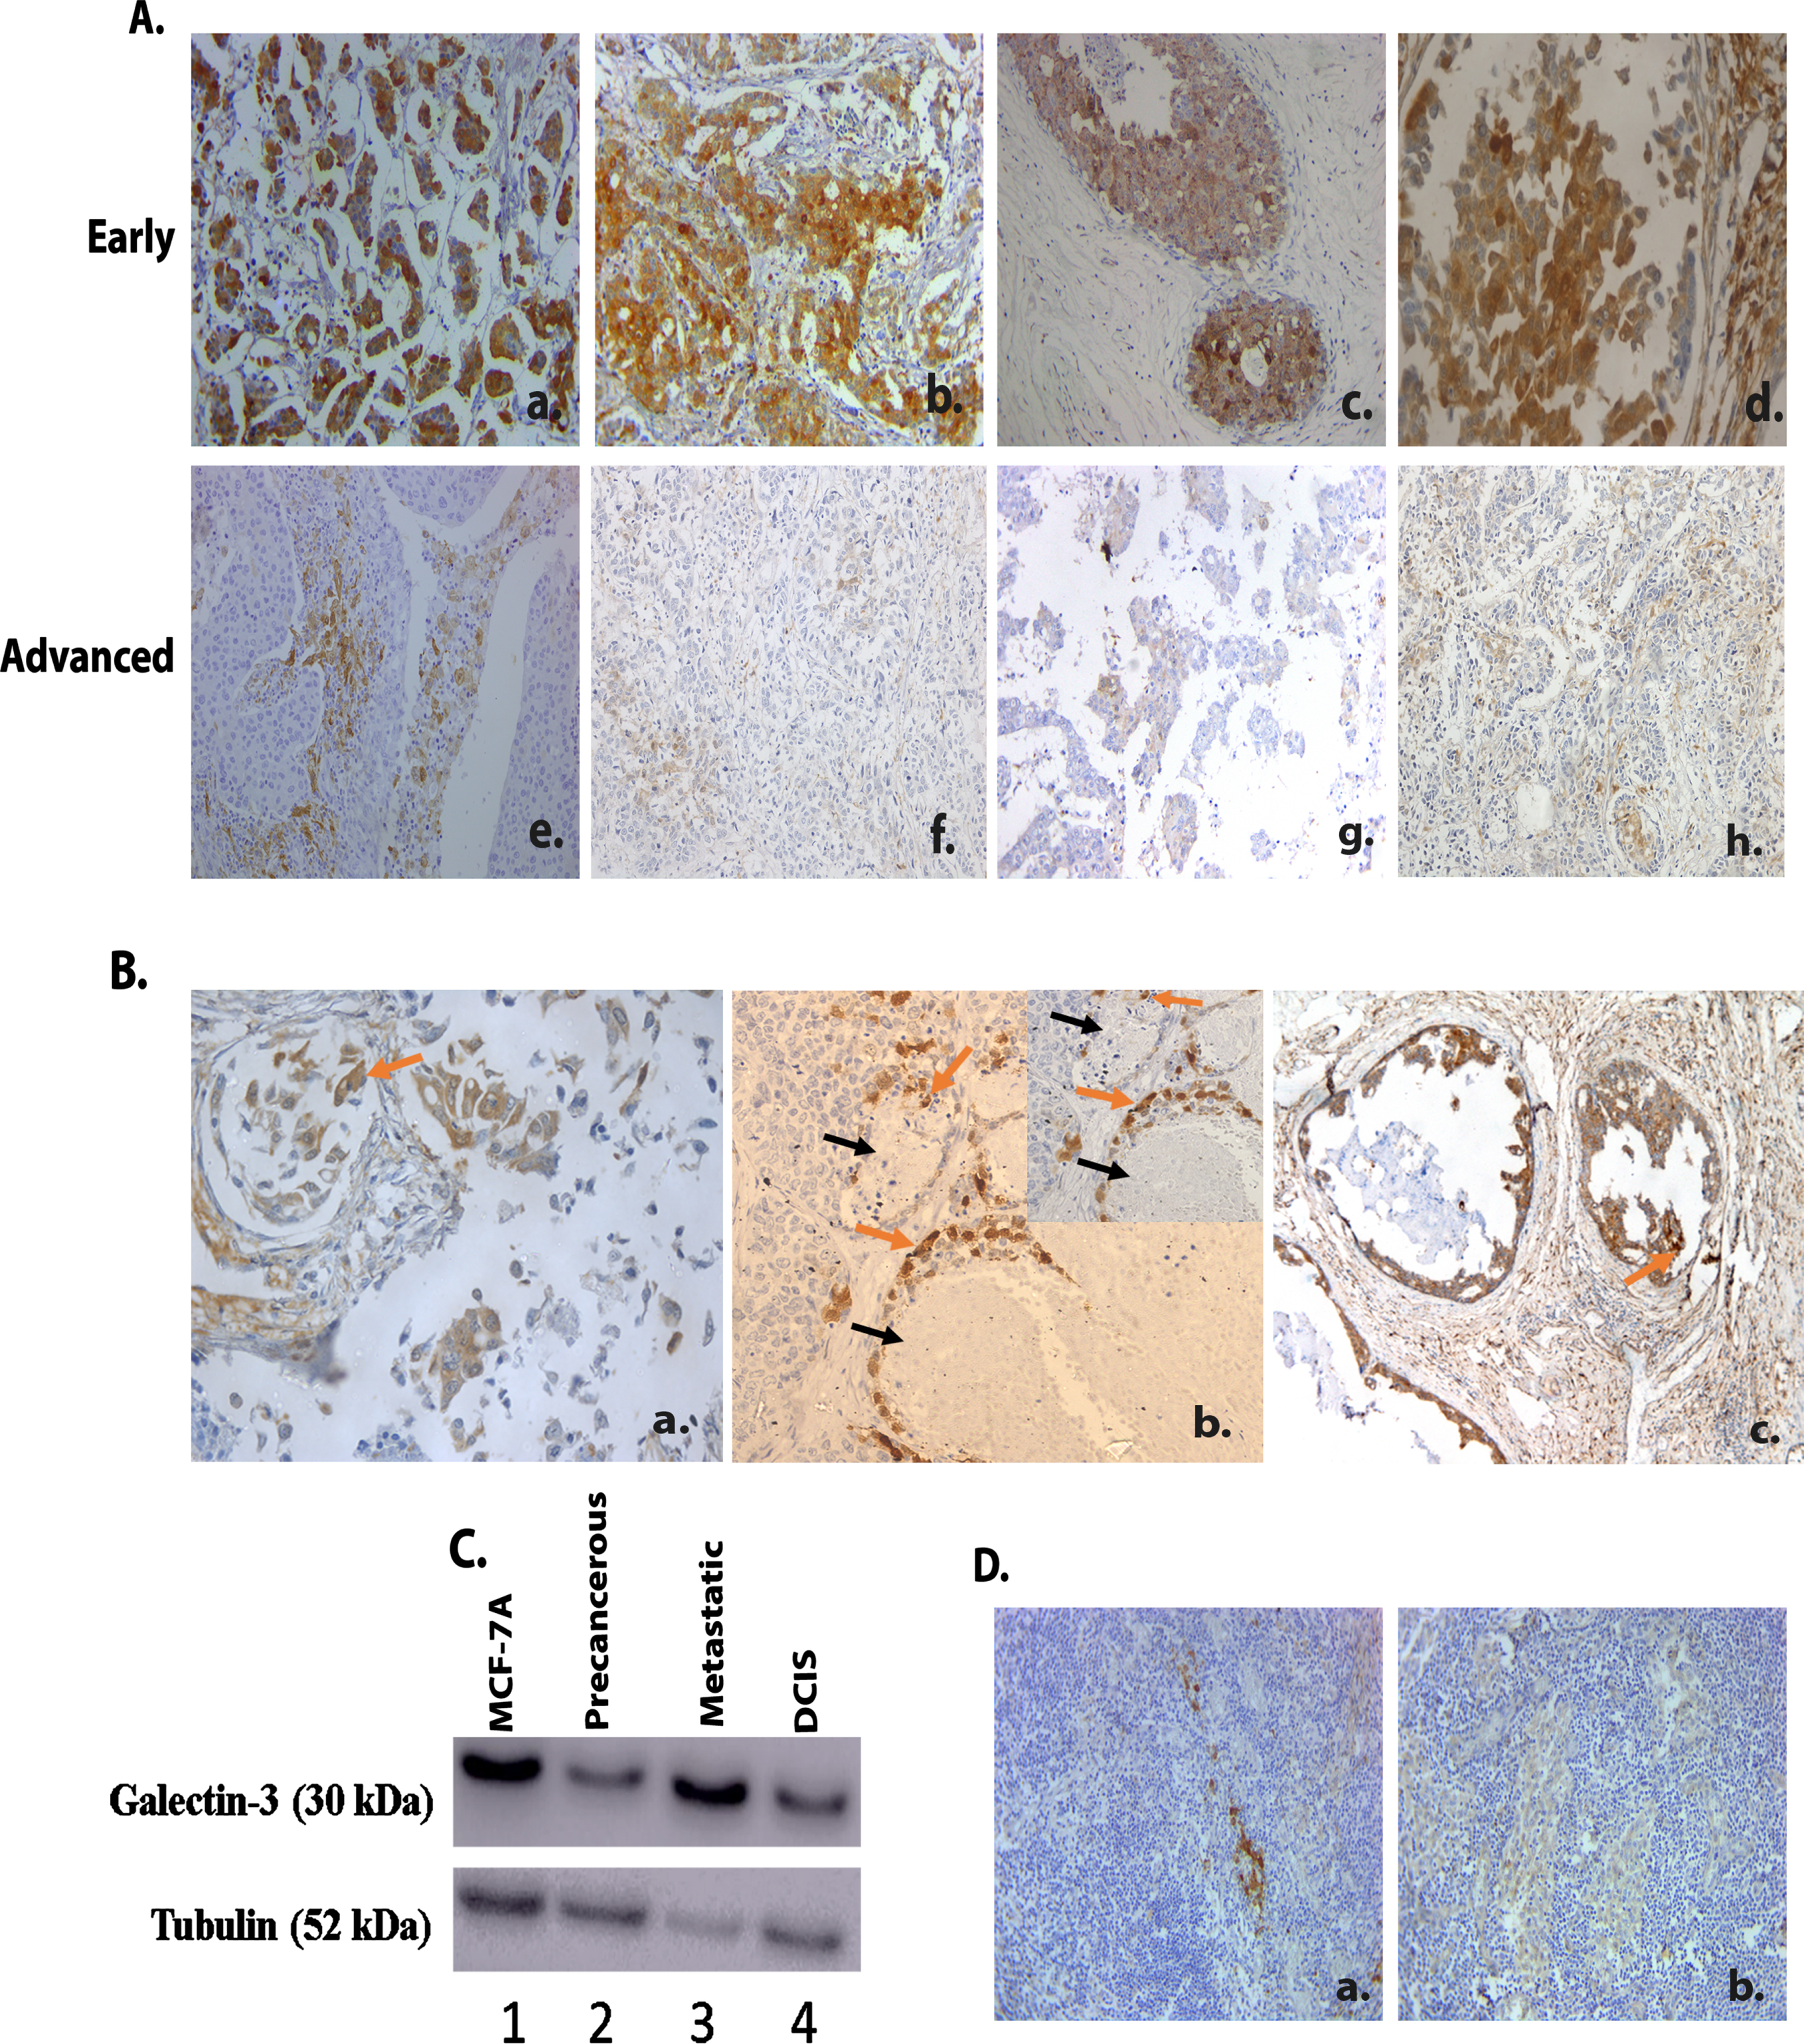 Galectin-3 expression in human breast tumor tissues A. 489 IDC samples were immunohistochemically stained using a monoclonal galectin-3 antibody as described in Materials and methods. A. Representative images of breast tumor tissues showing galectin-3 expression in early (Stage 1A-StageIIIA) (a- (20X), b-(20X), c-(20X) & d-(20X) and advanced stages (Stage IIIB- Stage IV) (e-(20X), f-(20X), g-(20X), h-(20X) of primary breast tumors in TNBC. B. (a.) Representative image of primary tumor tissue showing galectin-3 expression in invading areas (20X). Arrow (orange) indicates invading tumor cells. (b.) Representative image of primary tumor tissue showing galectin-3 expression in tumor cells near blood vessels (20X). Arrow (black) indicates blood vessel and Arrow (orange) indicates tumor cells near blood vessels. (c.) Representative image of primary tumor tissue showing galectin-3 expression in intraductal areas (20X). Arrow (orange) indicates tumor cells in the intraductal area. C. Western blot analysis of galectin-3 expression in breast cancer cell line model for tumor progression (1-MCF 10A (Normal), 2- MCF 10 AT (Precancerous), 3- MCF 10CA1D (Metastatic), 4- MCF 10DCIS (DCIS). Tubulin was used as the loading control. D. Both a. (20X) and b. (20X) show representative images of IHC analysis of galectin-3 expression in metastatic lymph node tissues from TNBC patients. The tumors were categorized into galectin-3 low (overall H-score<150) and galectin-3 high (overall H-score>150). H-scores were calculated by multiplying intensity score (0 = negative, 1+ = light, 2+ = moderate, 3+ = intense, 4+ = heavy) with the percentage of stained tumor cells. Overall score less than 40 was considered negative.